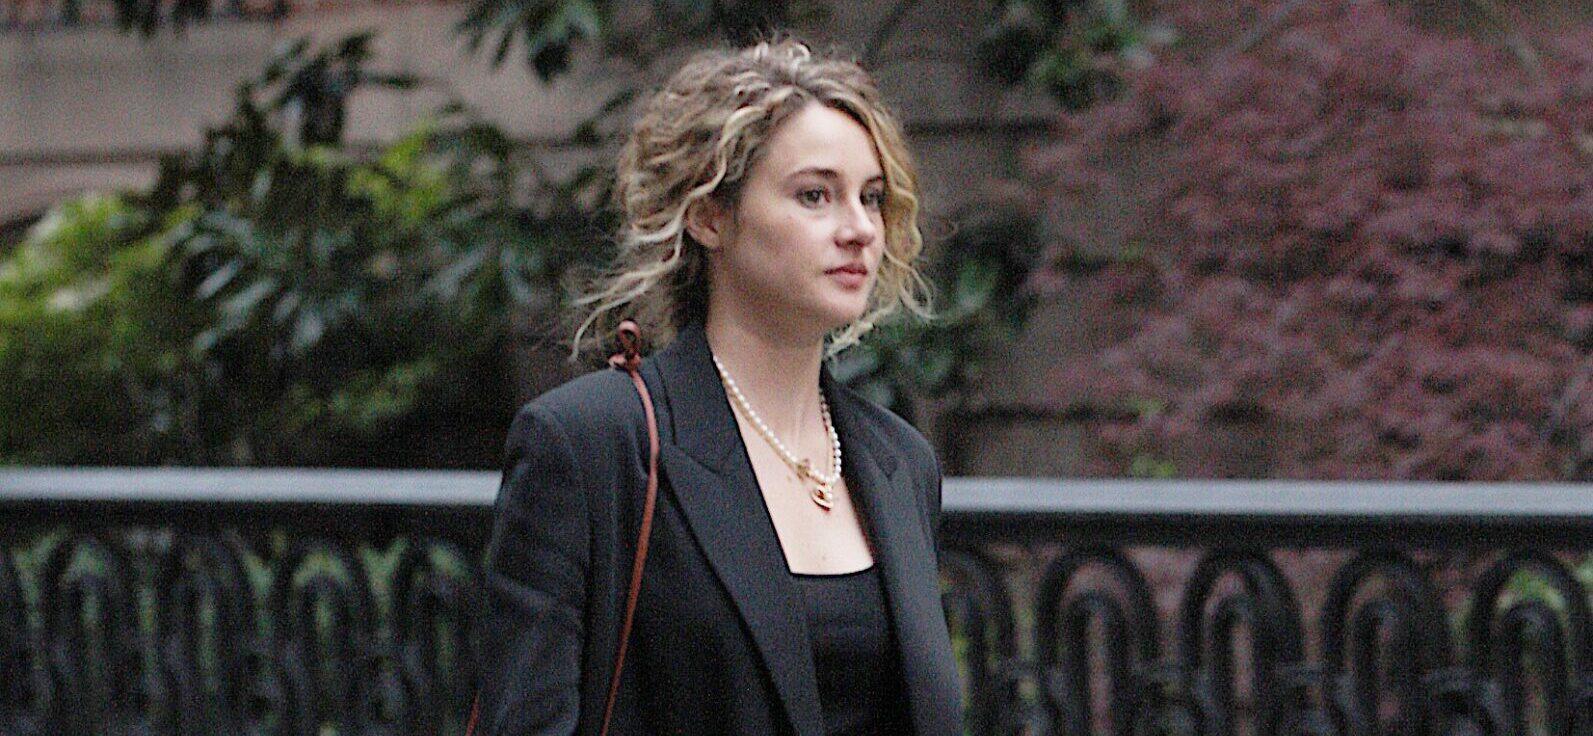 Shailene Woodley was seen on the set of the show named quot Three Women quot in Manhattan NYC